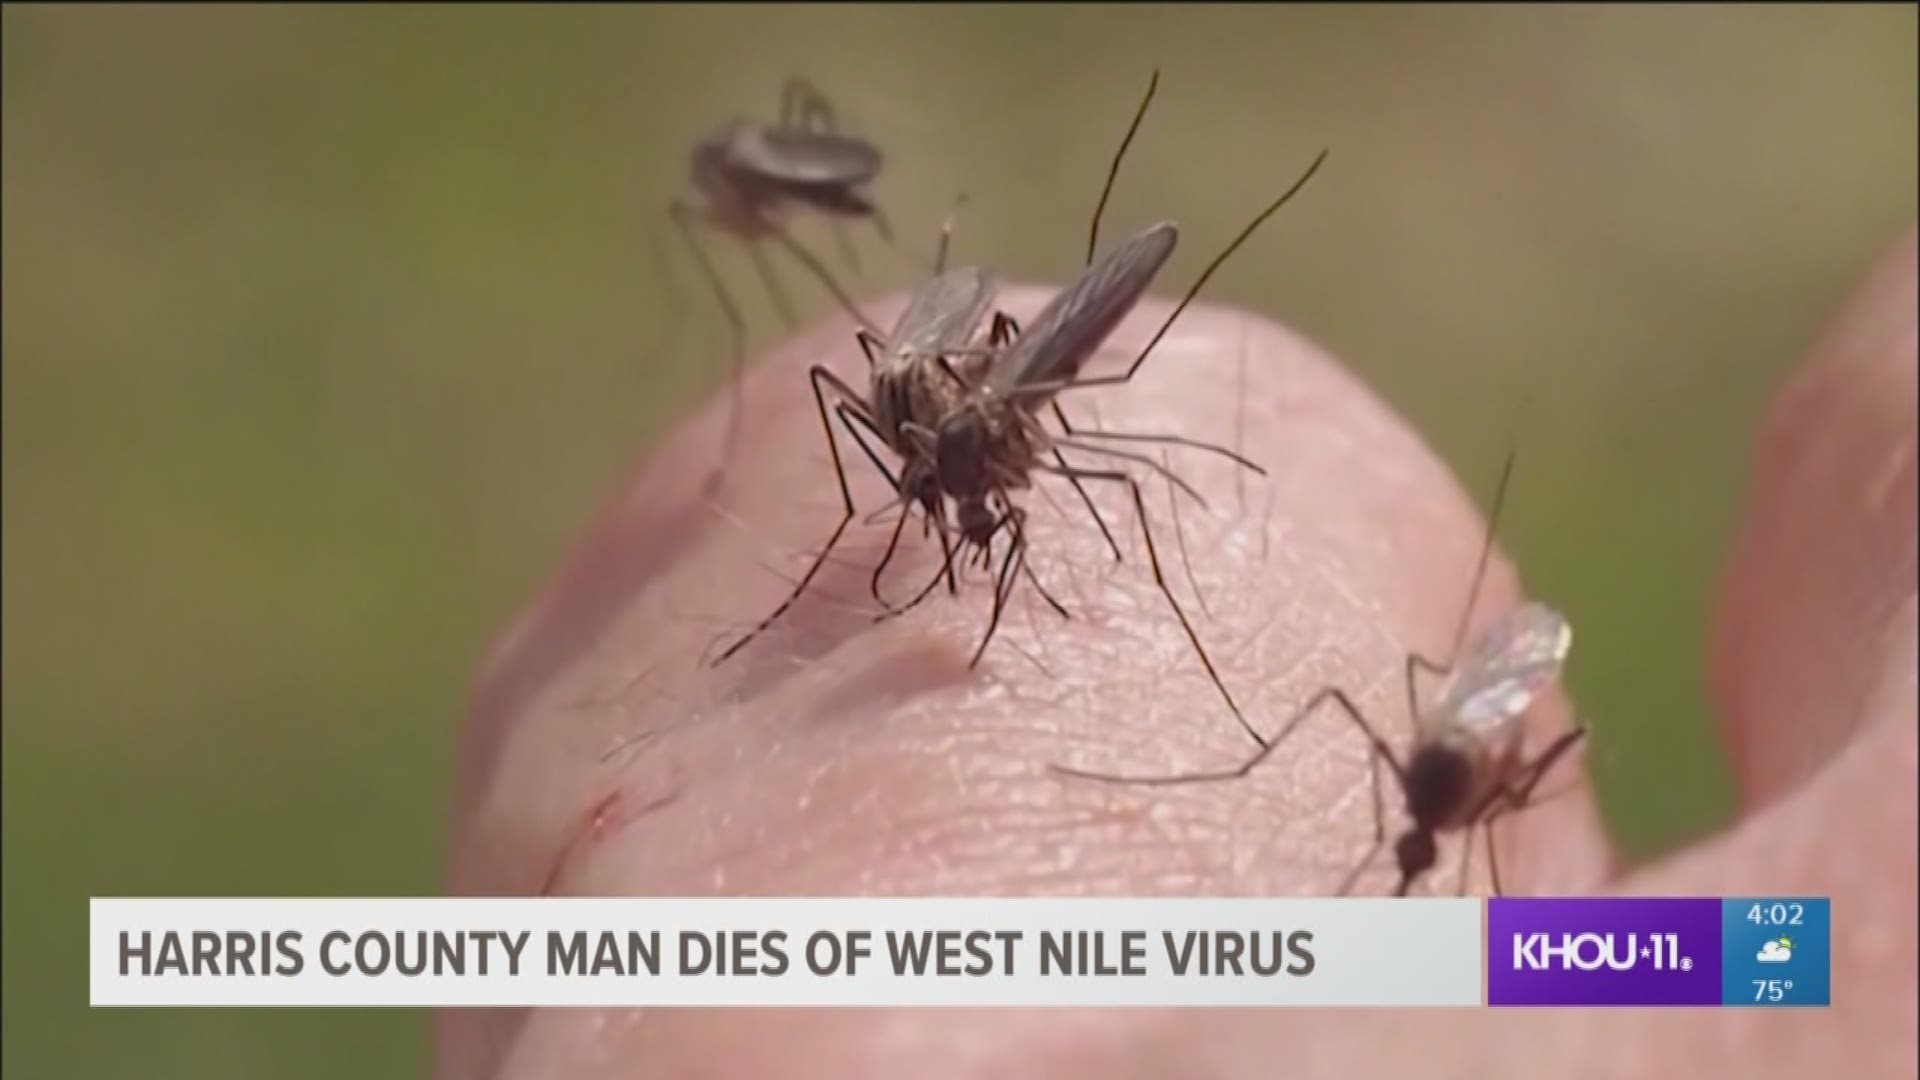 Officials have confirmed the first death this year related to the West Nile virus in Harris County. The patient was a man between the ages of 45-54 and was from Southwest Harris County.  